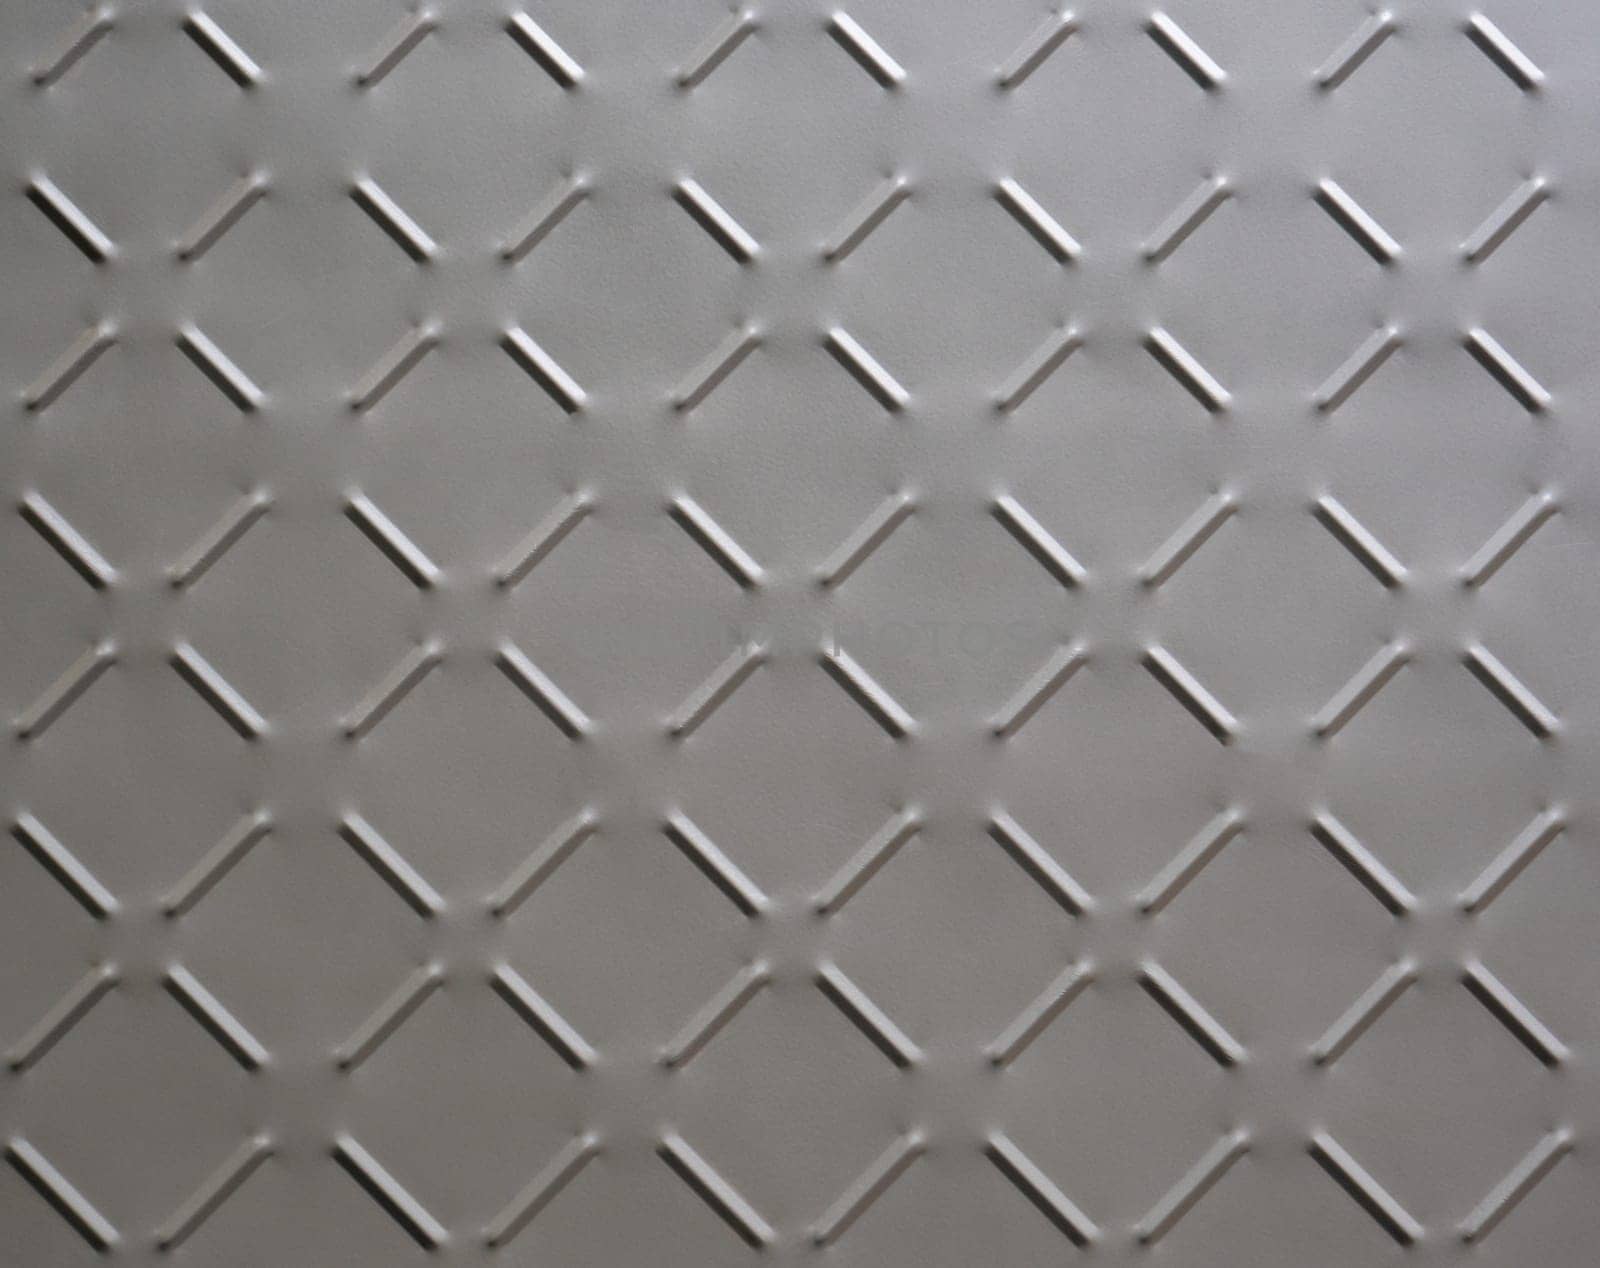 abstract background of metal plate with diamond pattern painted grey close up.